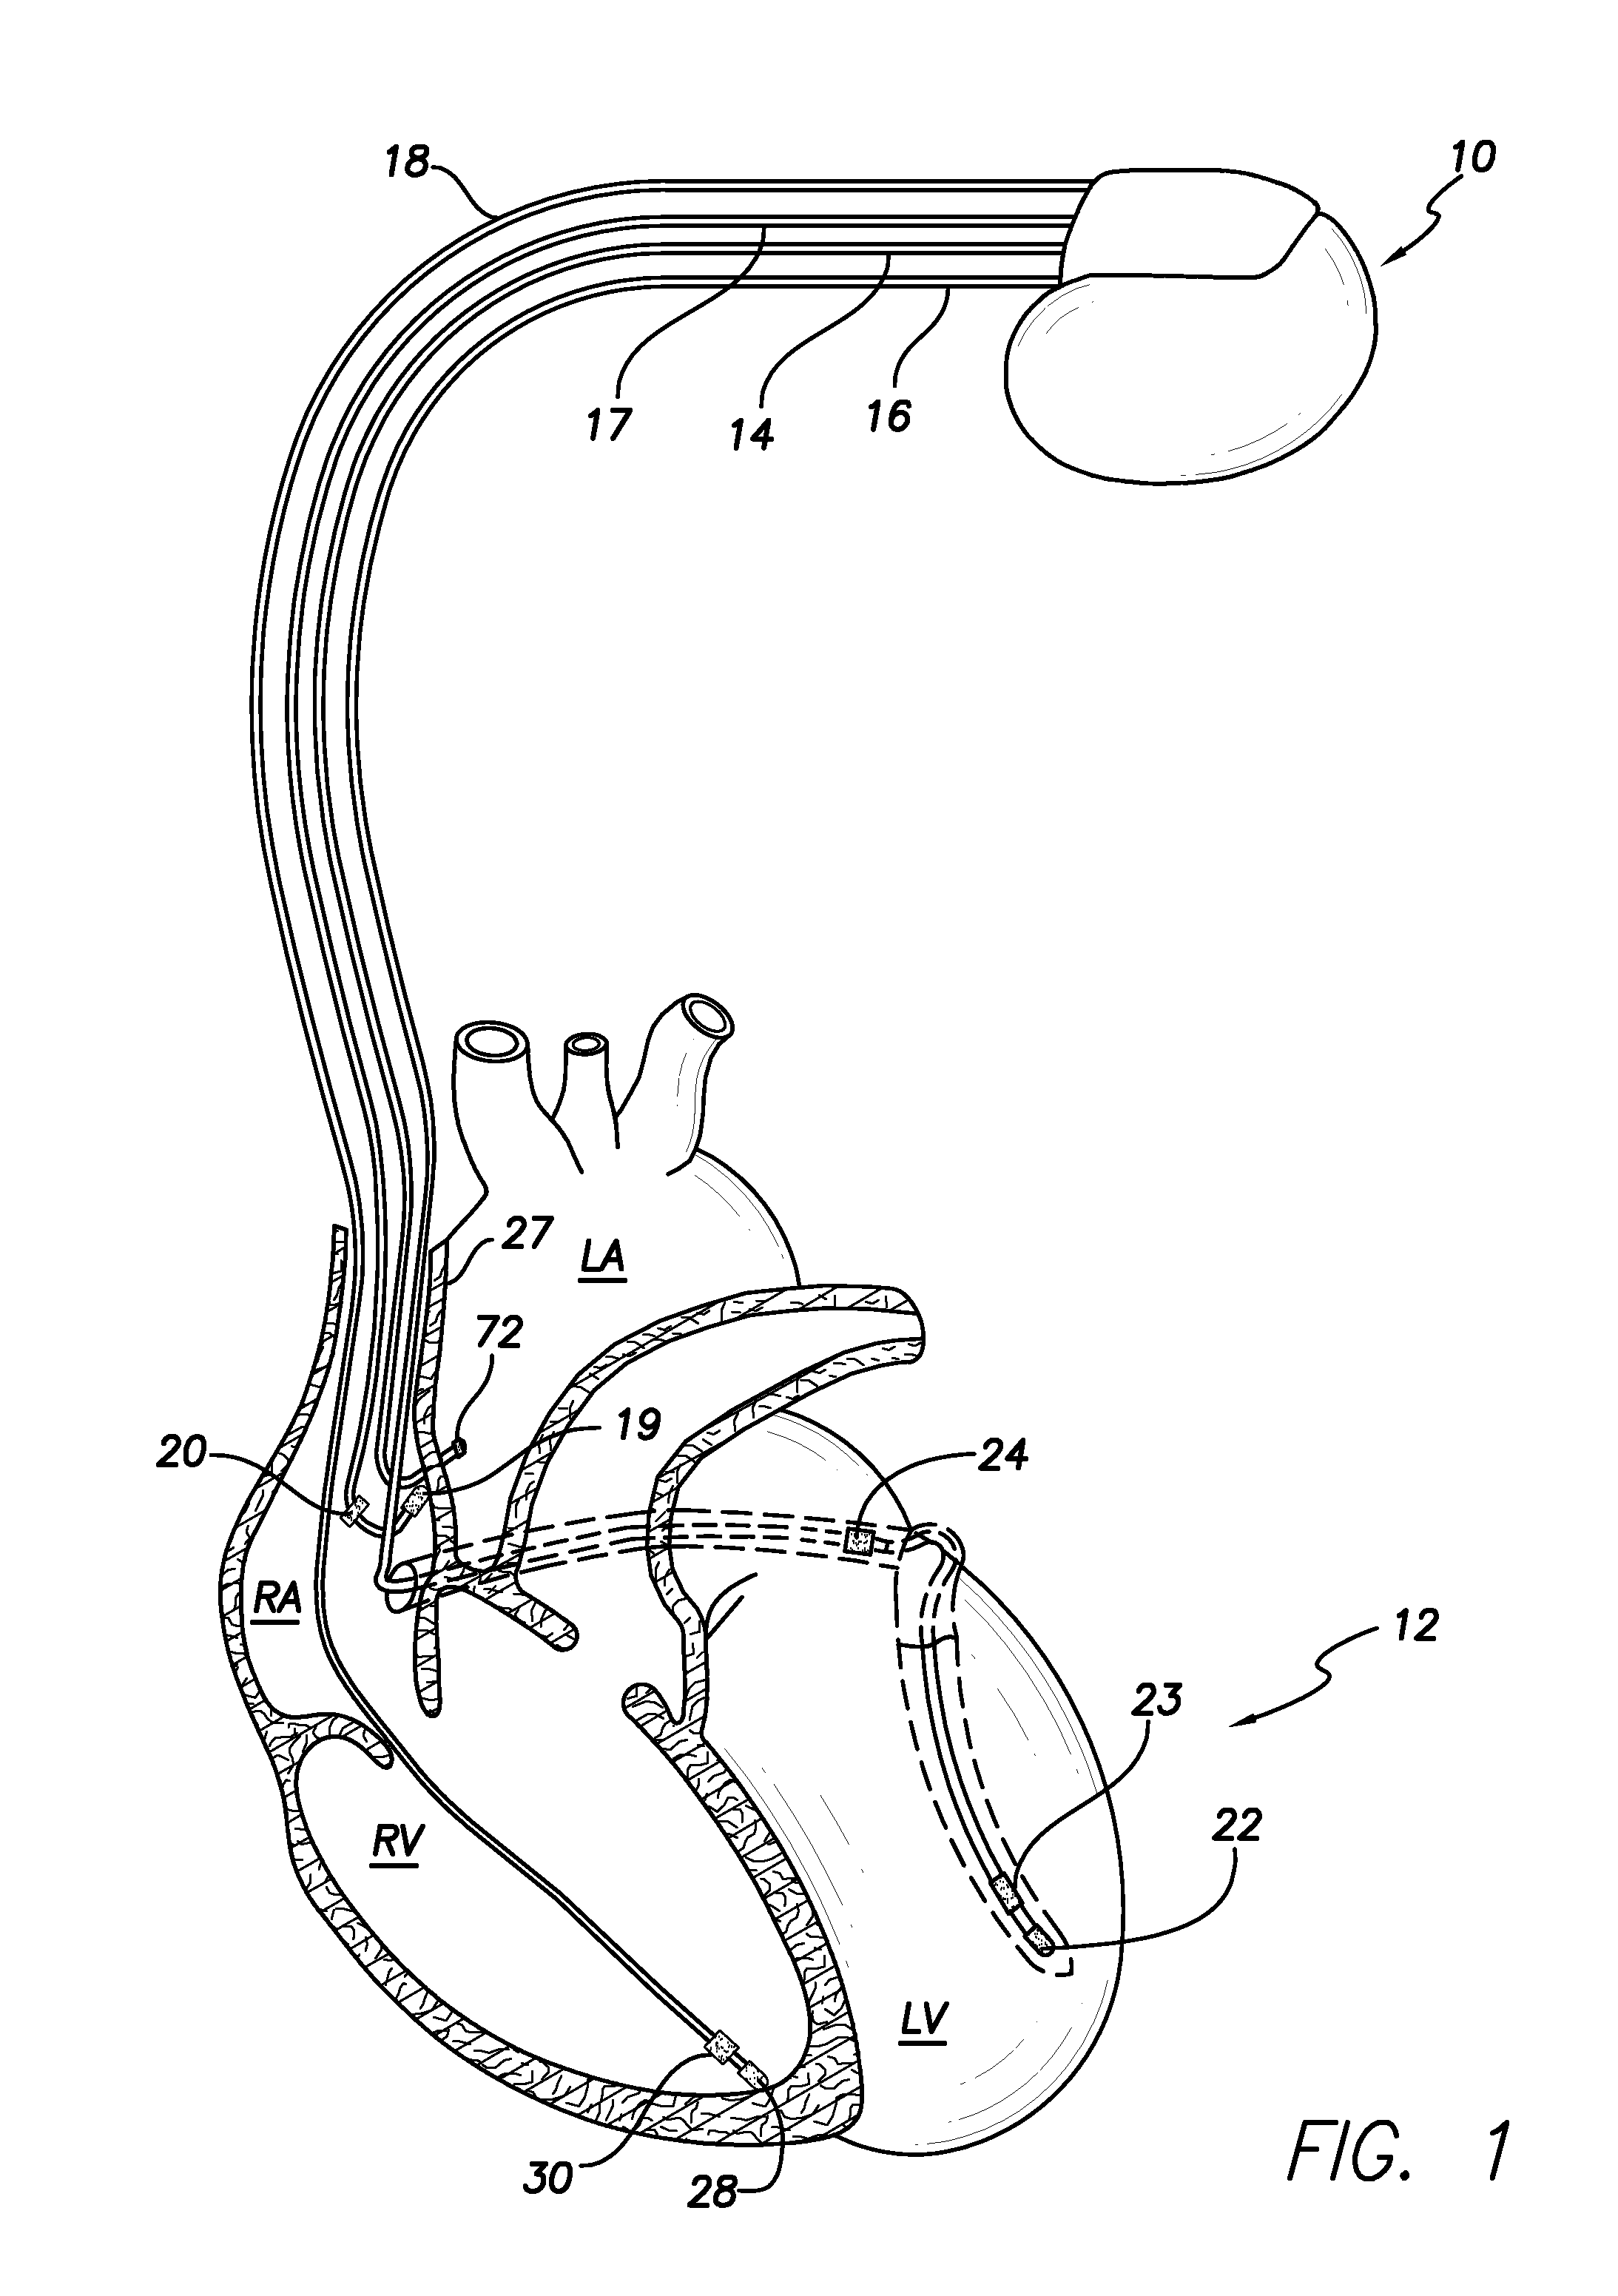 Method and system for stimulating a heart of a patient